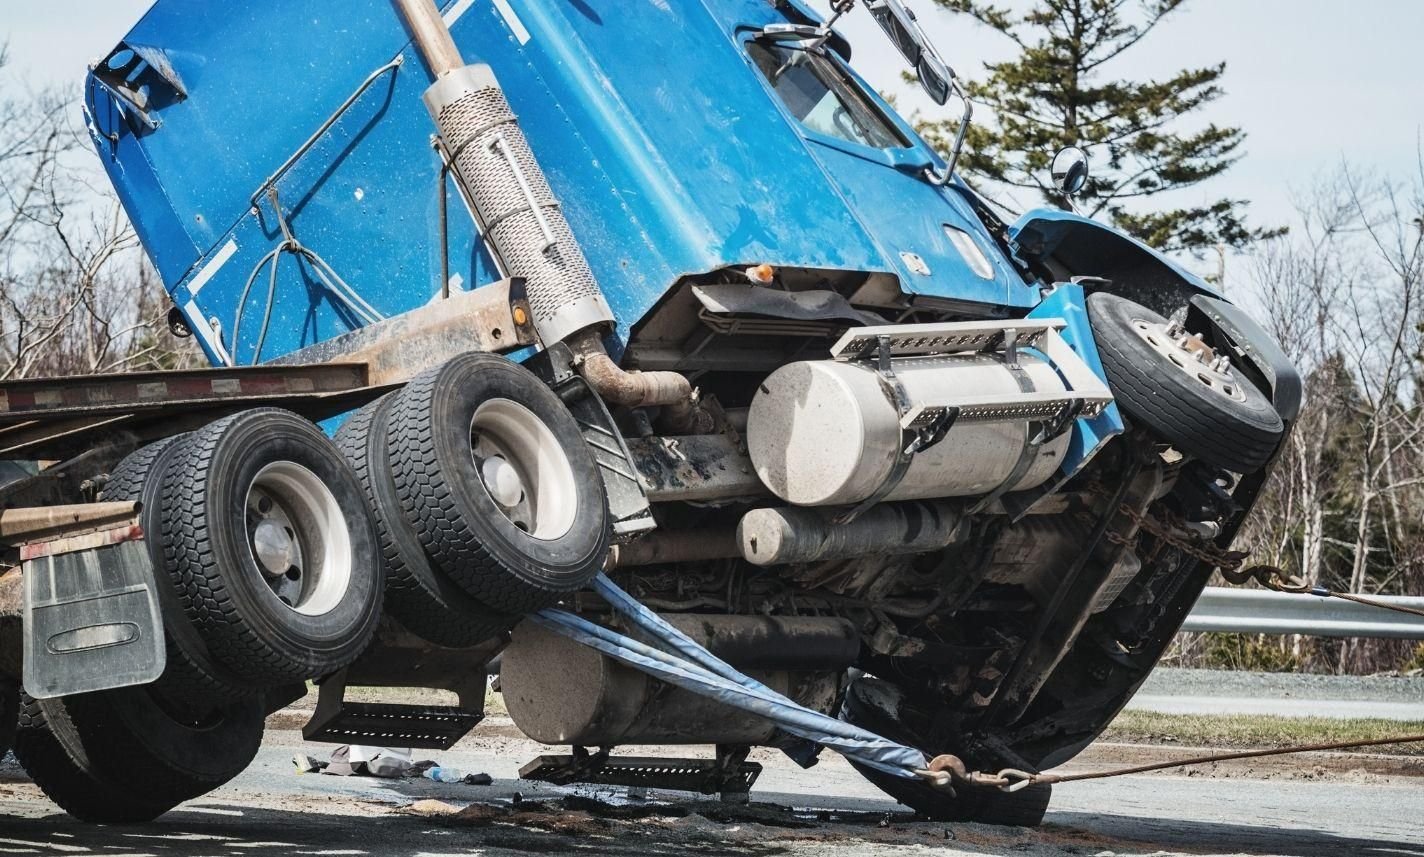 heron-bay-commercial-truck-accident-injury-lawyer